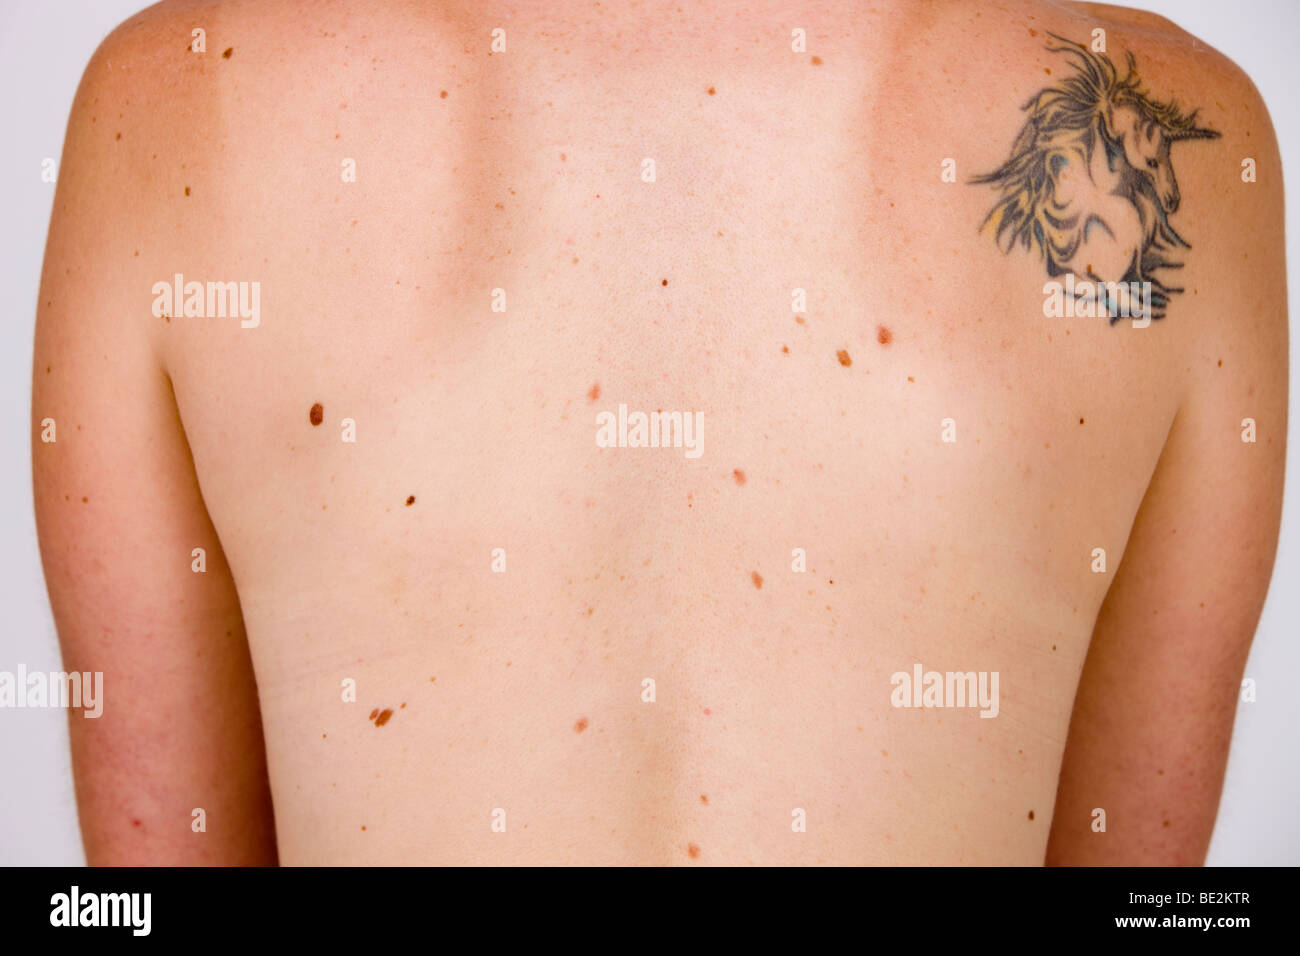 Moles on the back, skin cancer risk Stock Photo